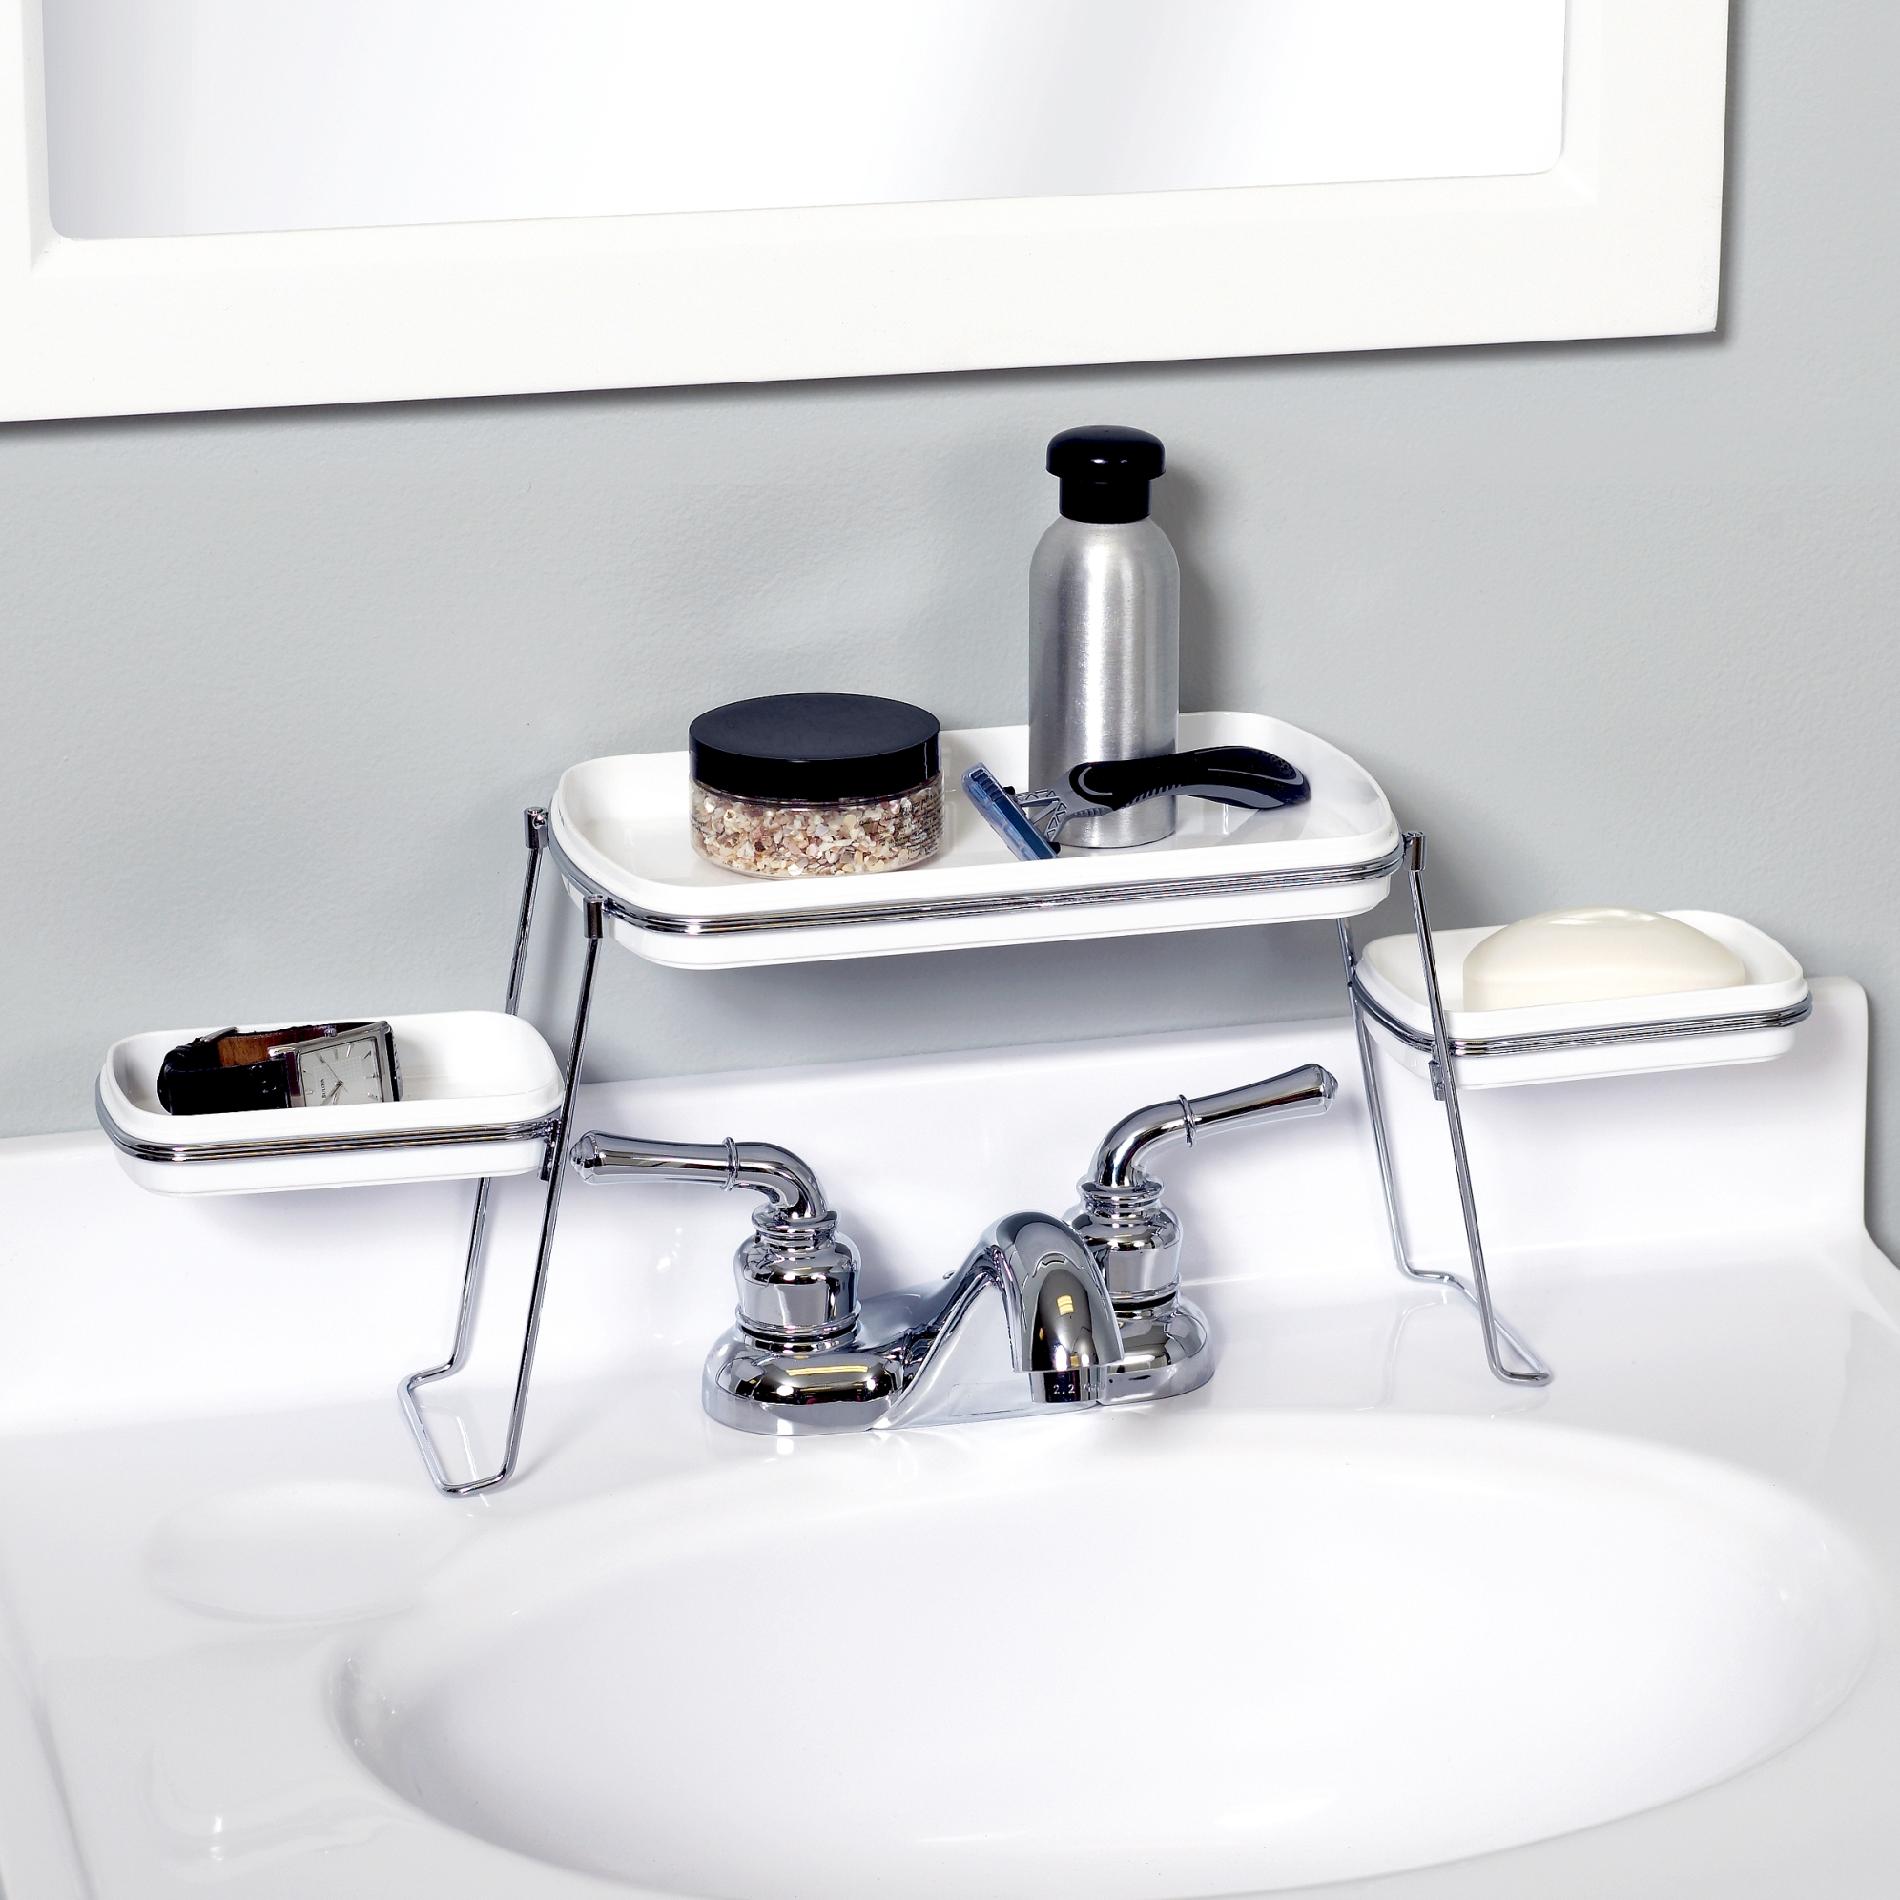 Zenith Products Small Spaces Over the Faucet Shelf in White